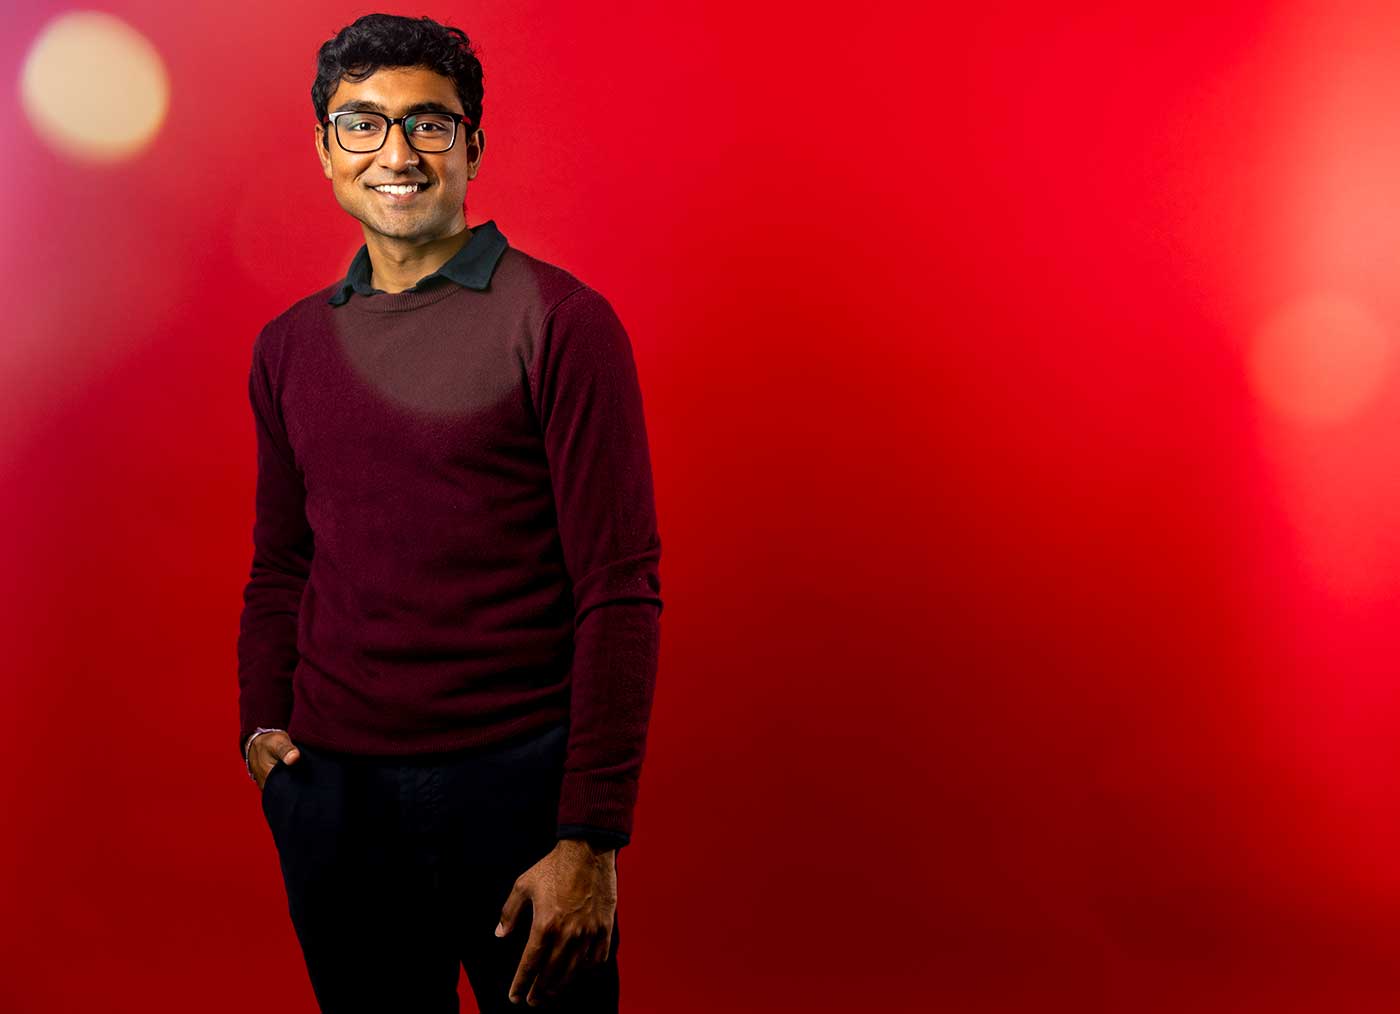 Vivek Kanpa poses in front of a red background